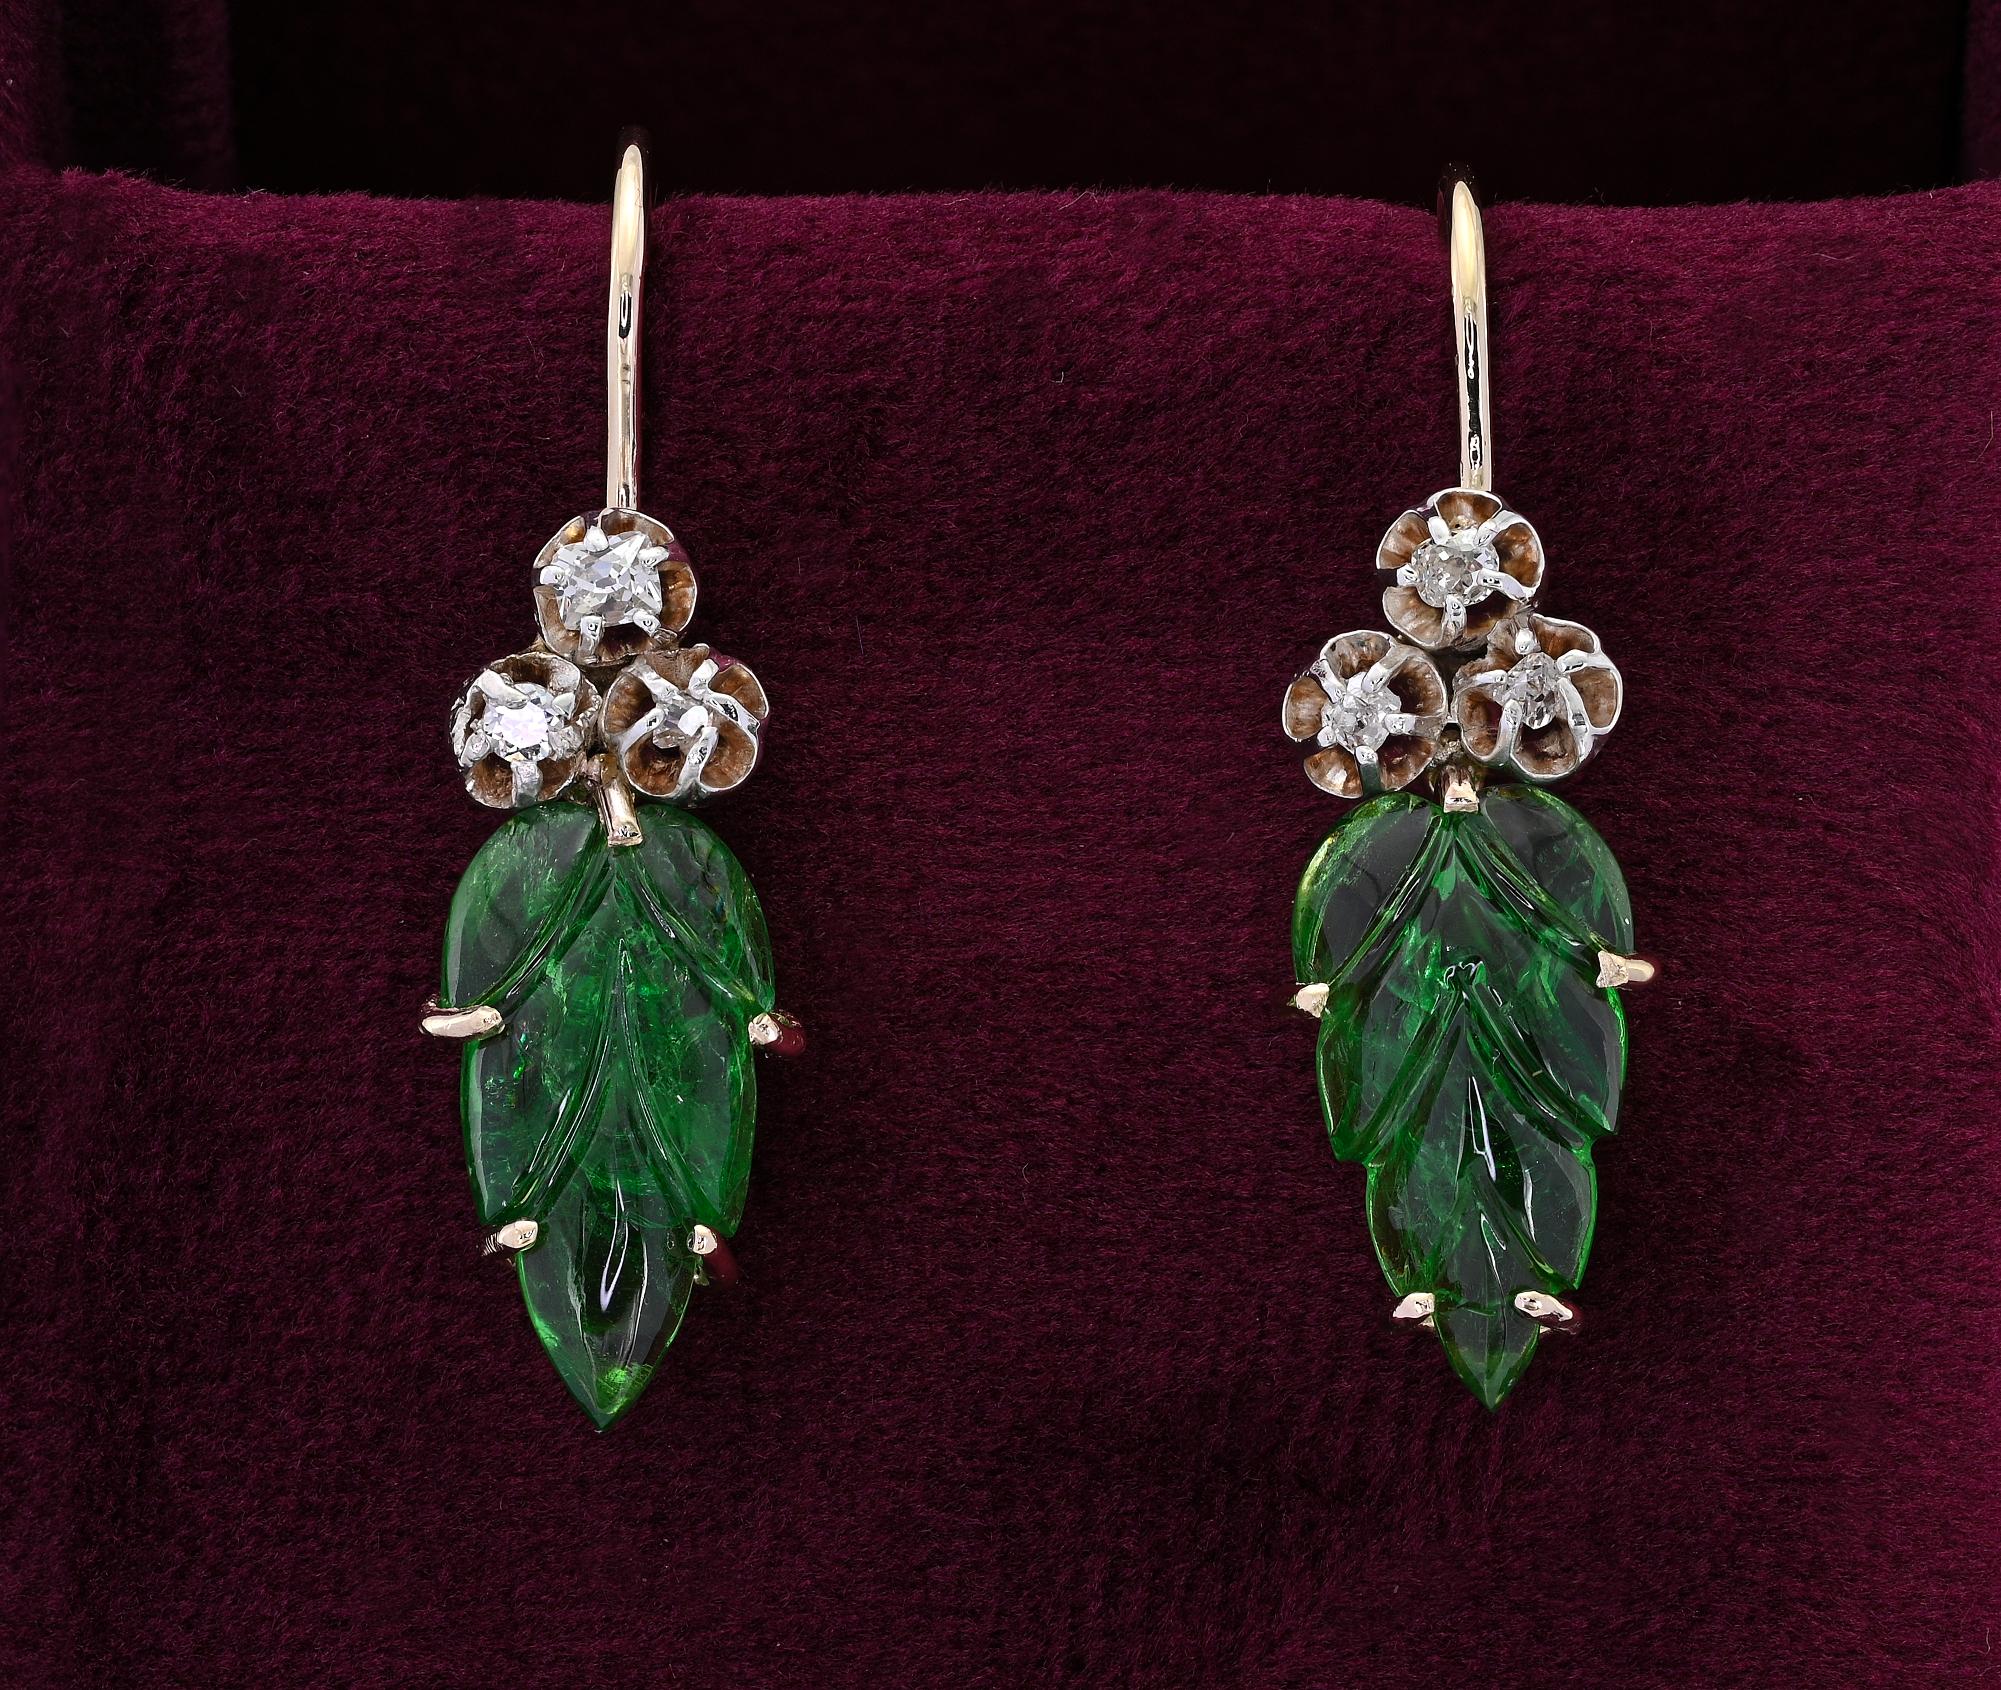 These charming late Victorian period are 1940 ca
Marvelously hand crafted during the time of solid 12 Kt gold
Simple yet effective design made by two stunning Green Garnets of the richest Green color skillfully leaf carved – approx. 9.00 Ct for both